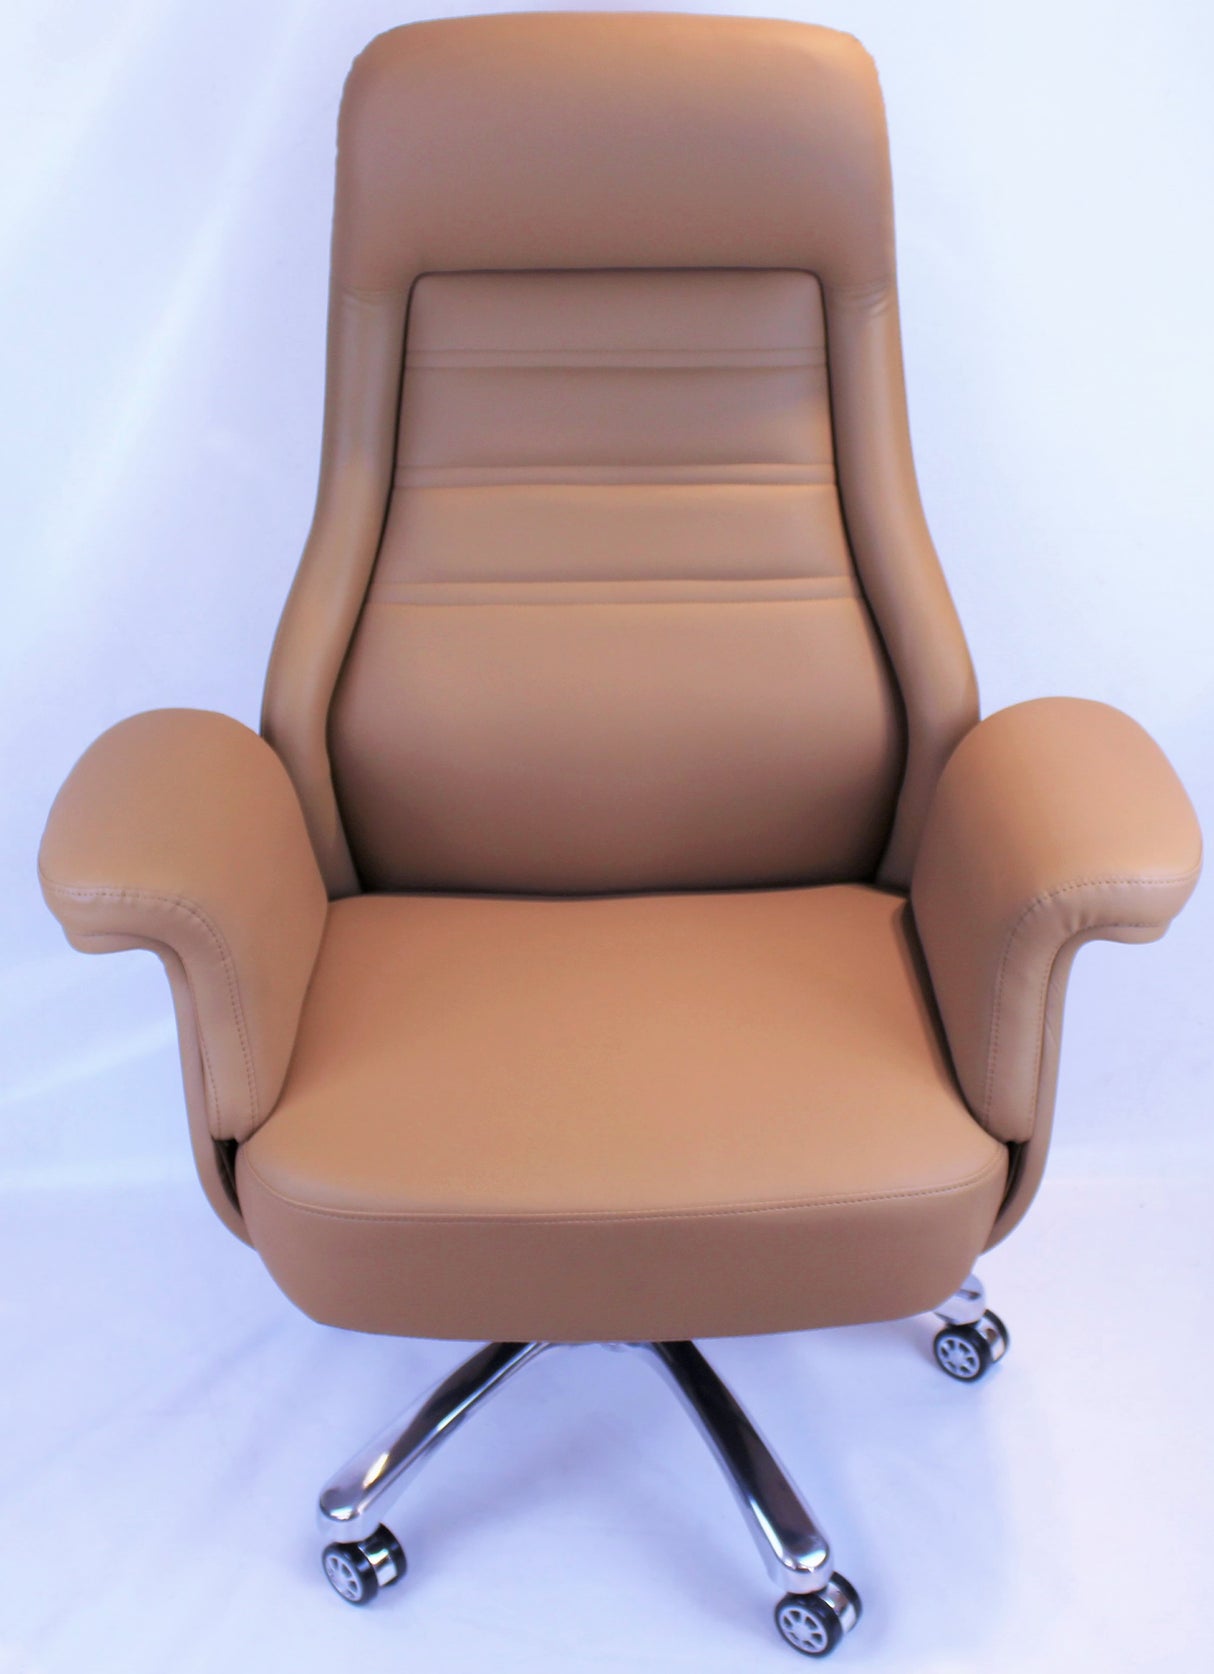 Beige Leather Executive Office Chair - DH-090